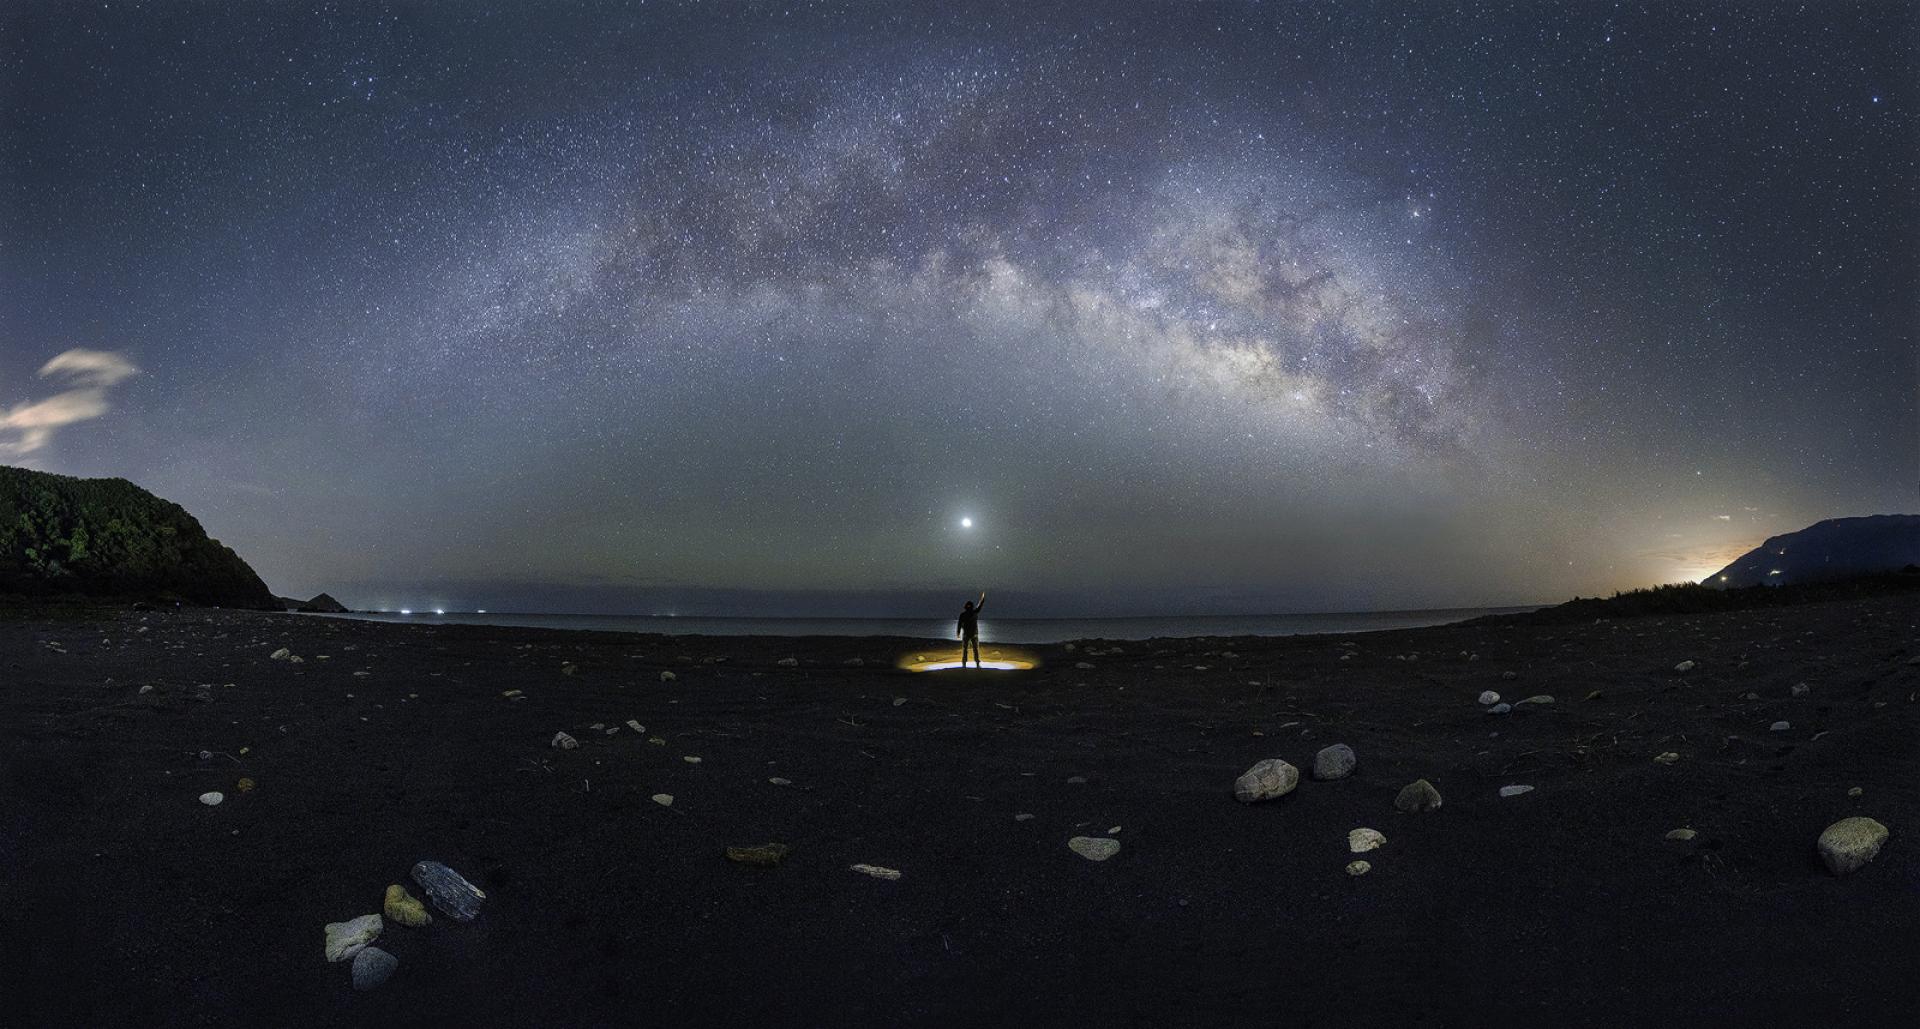 New York Photography Awards Winner - The Milky Way , Our House